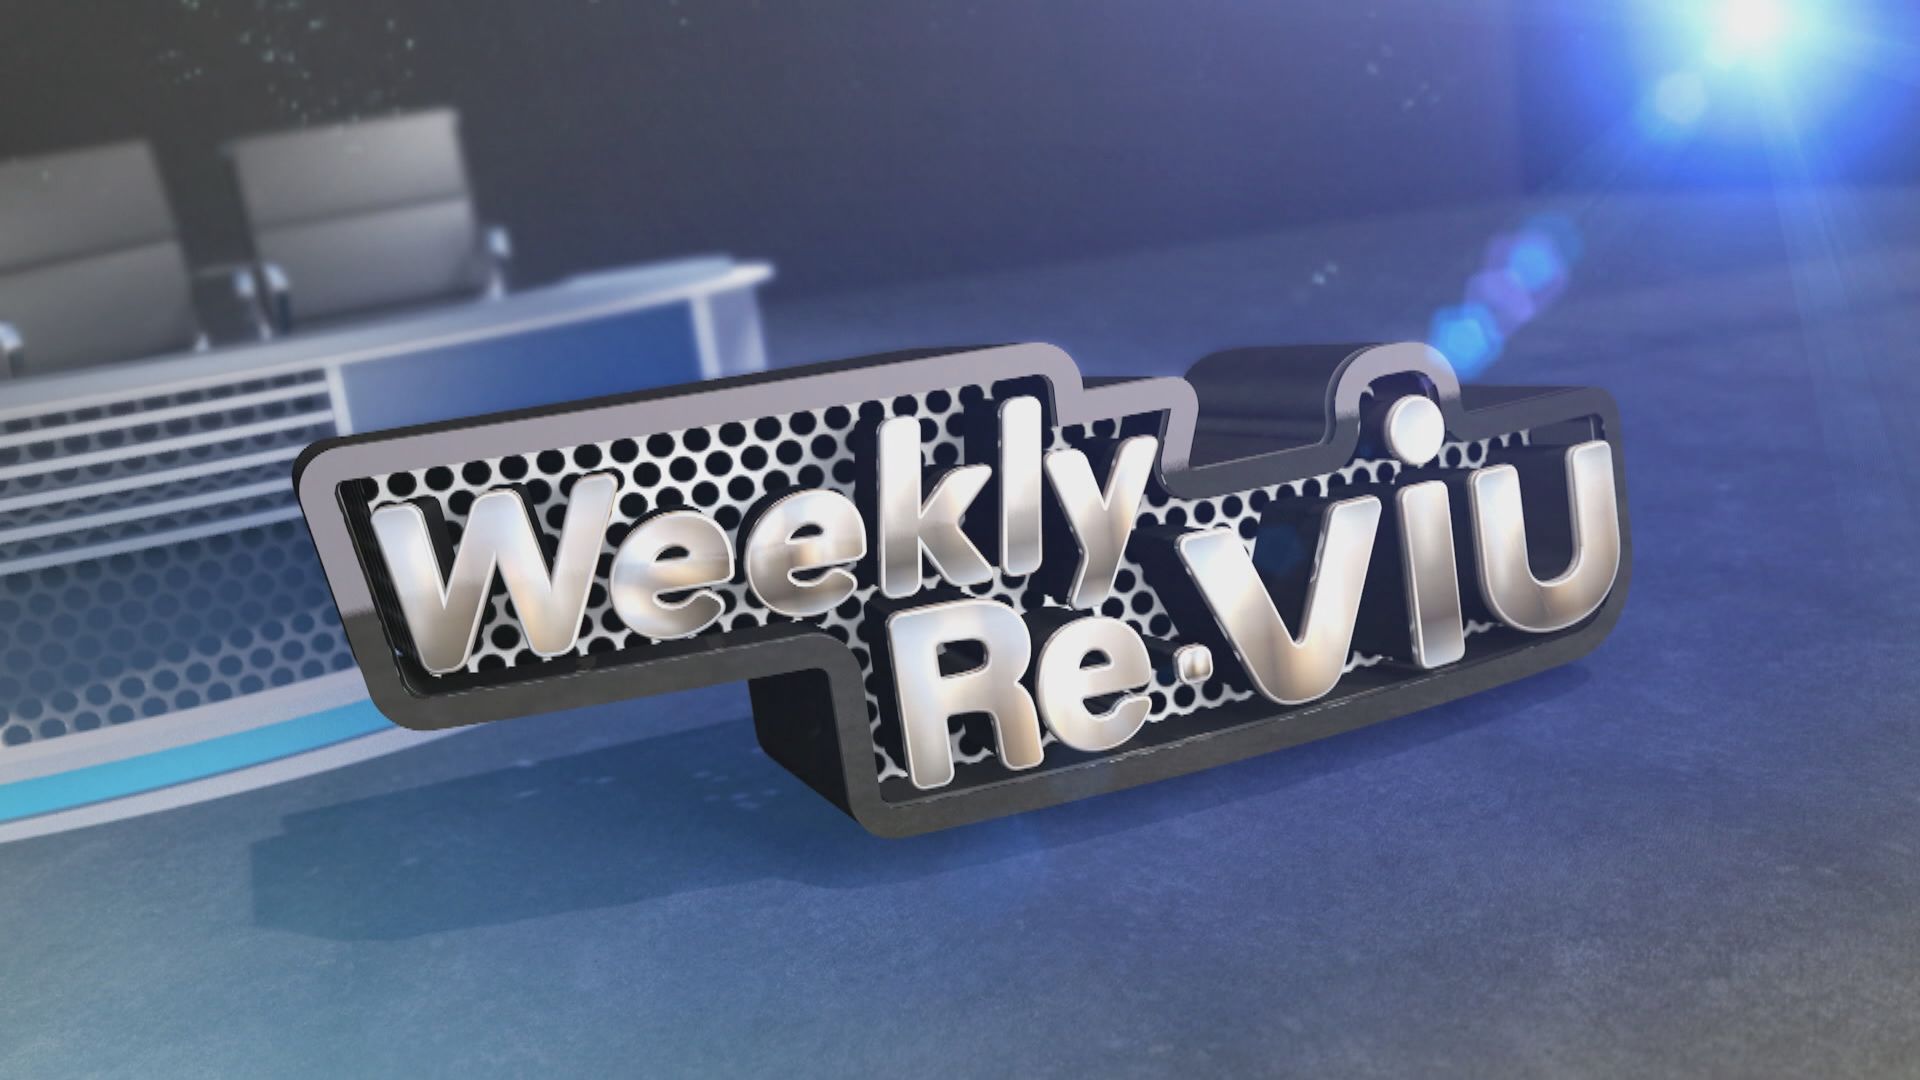 Weekly ReViu | Part Two - Story Roundup (21.1.2023)